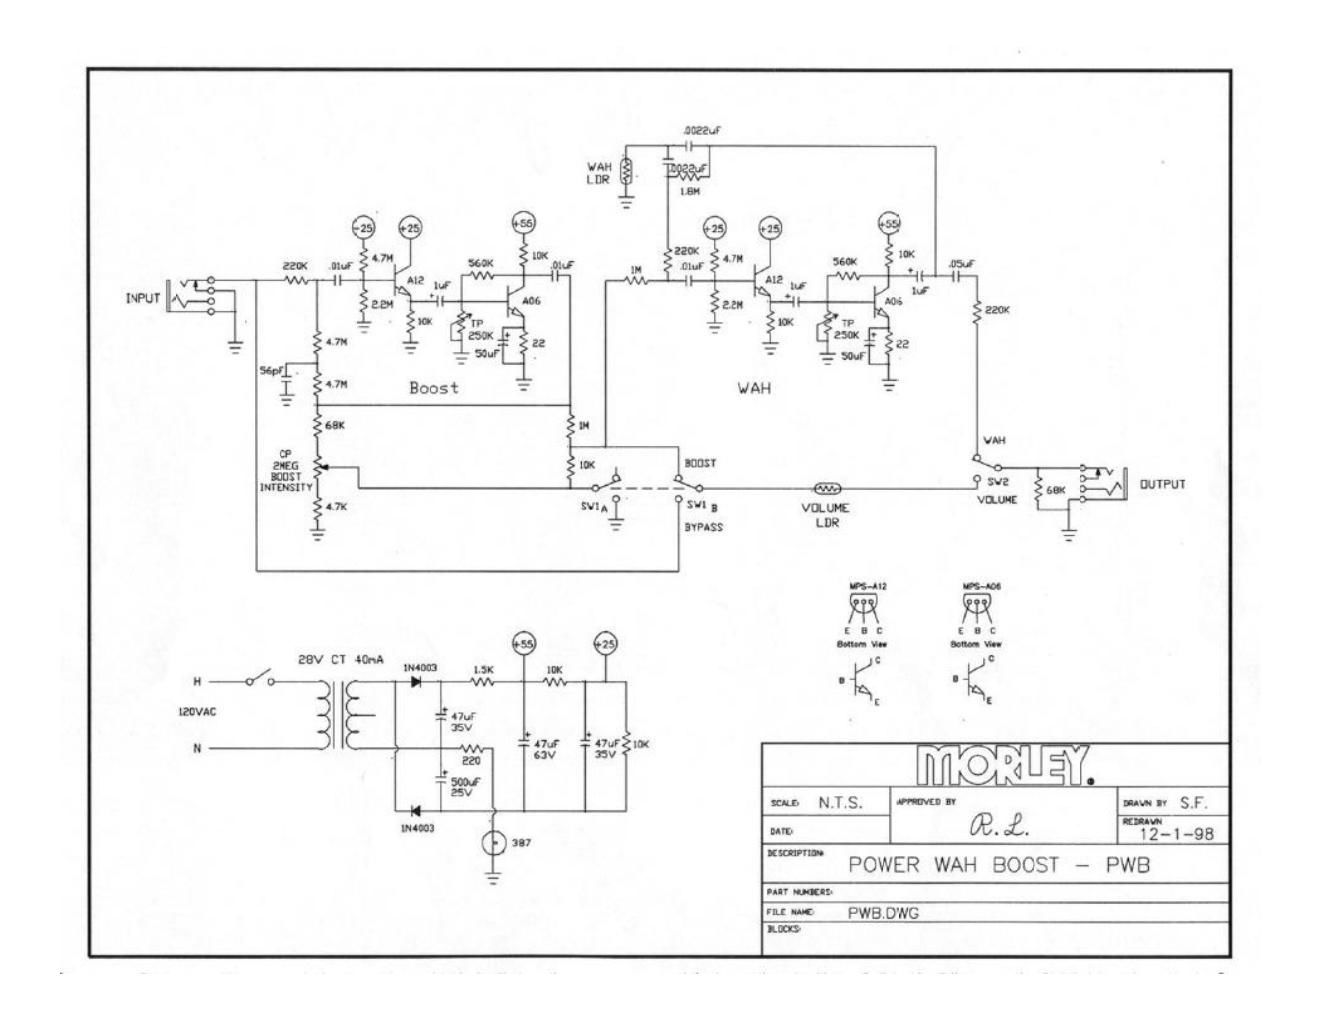 Morley PWB Wah Boost Schematic